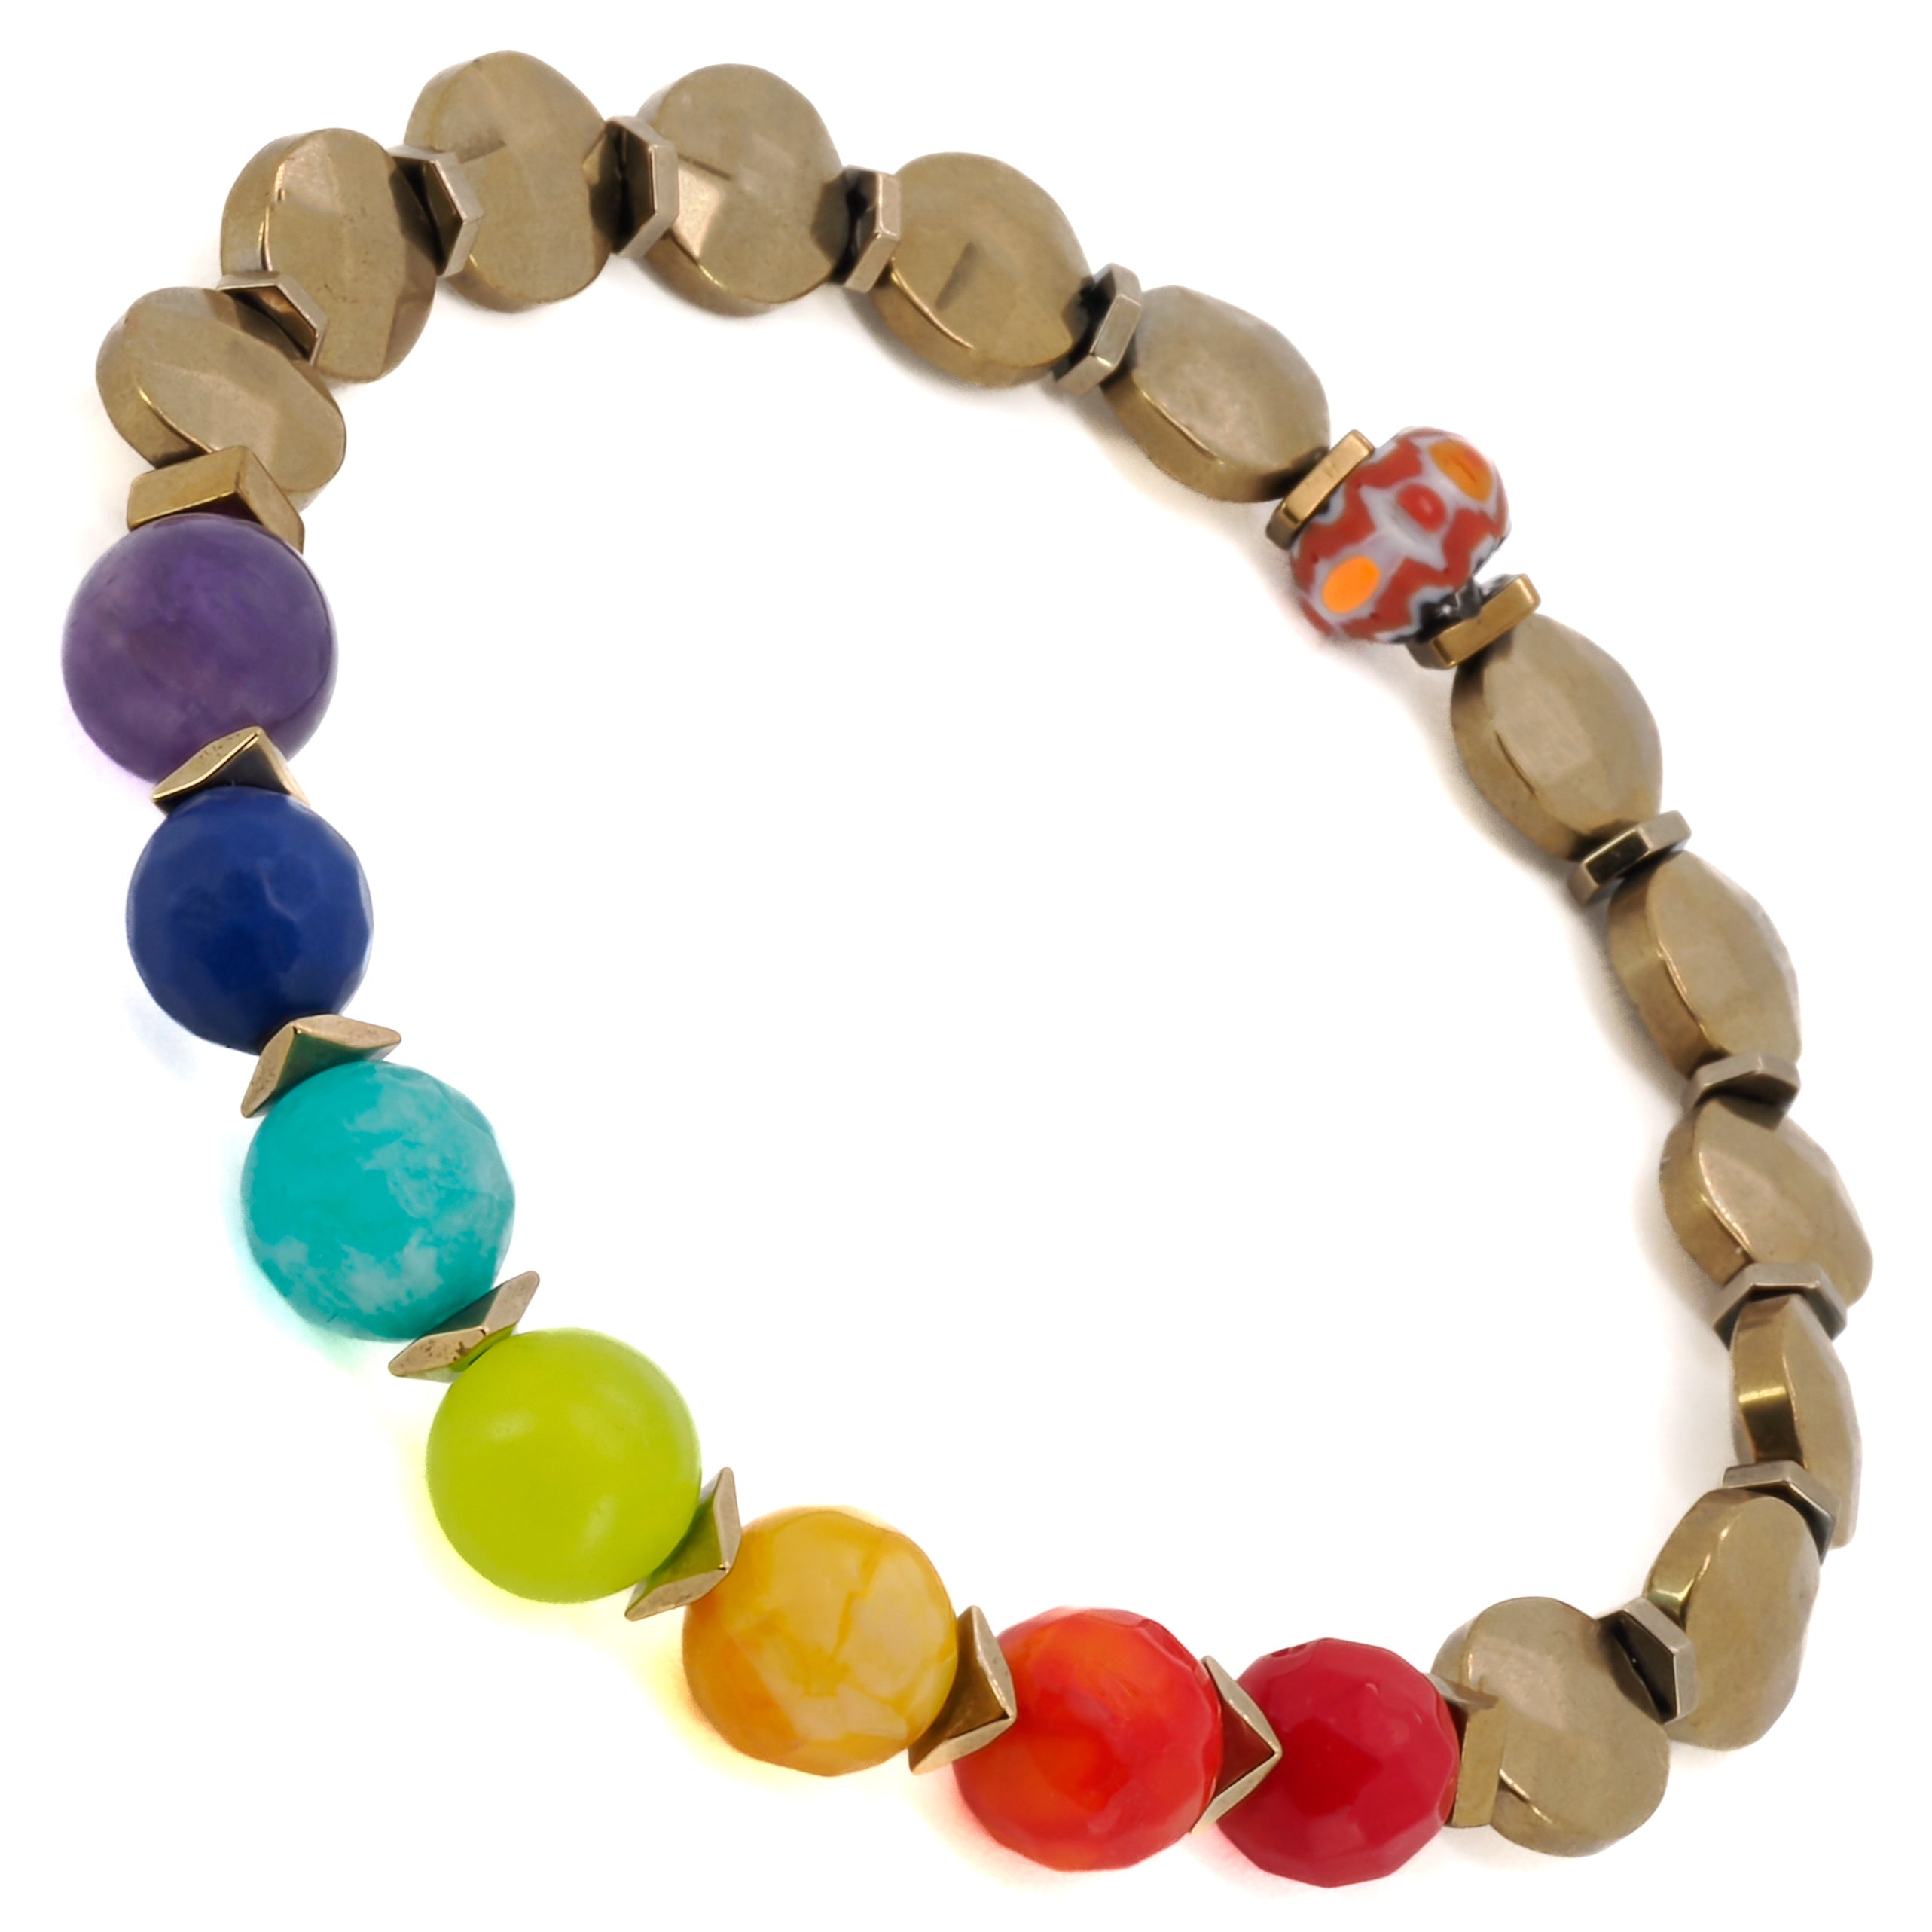 Chakra Balance Bracelet, a unique blend of natural stones for enhancing spiritual growth and inner harmony.